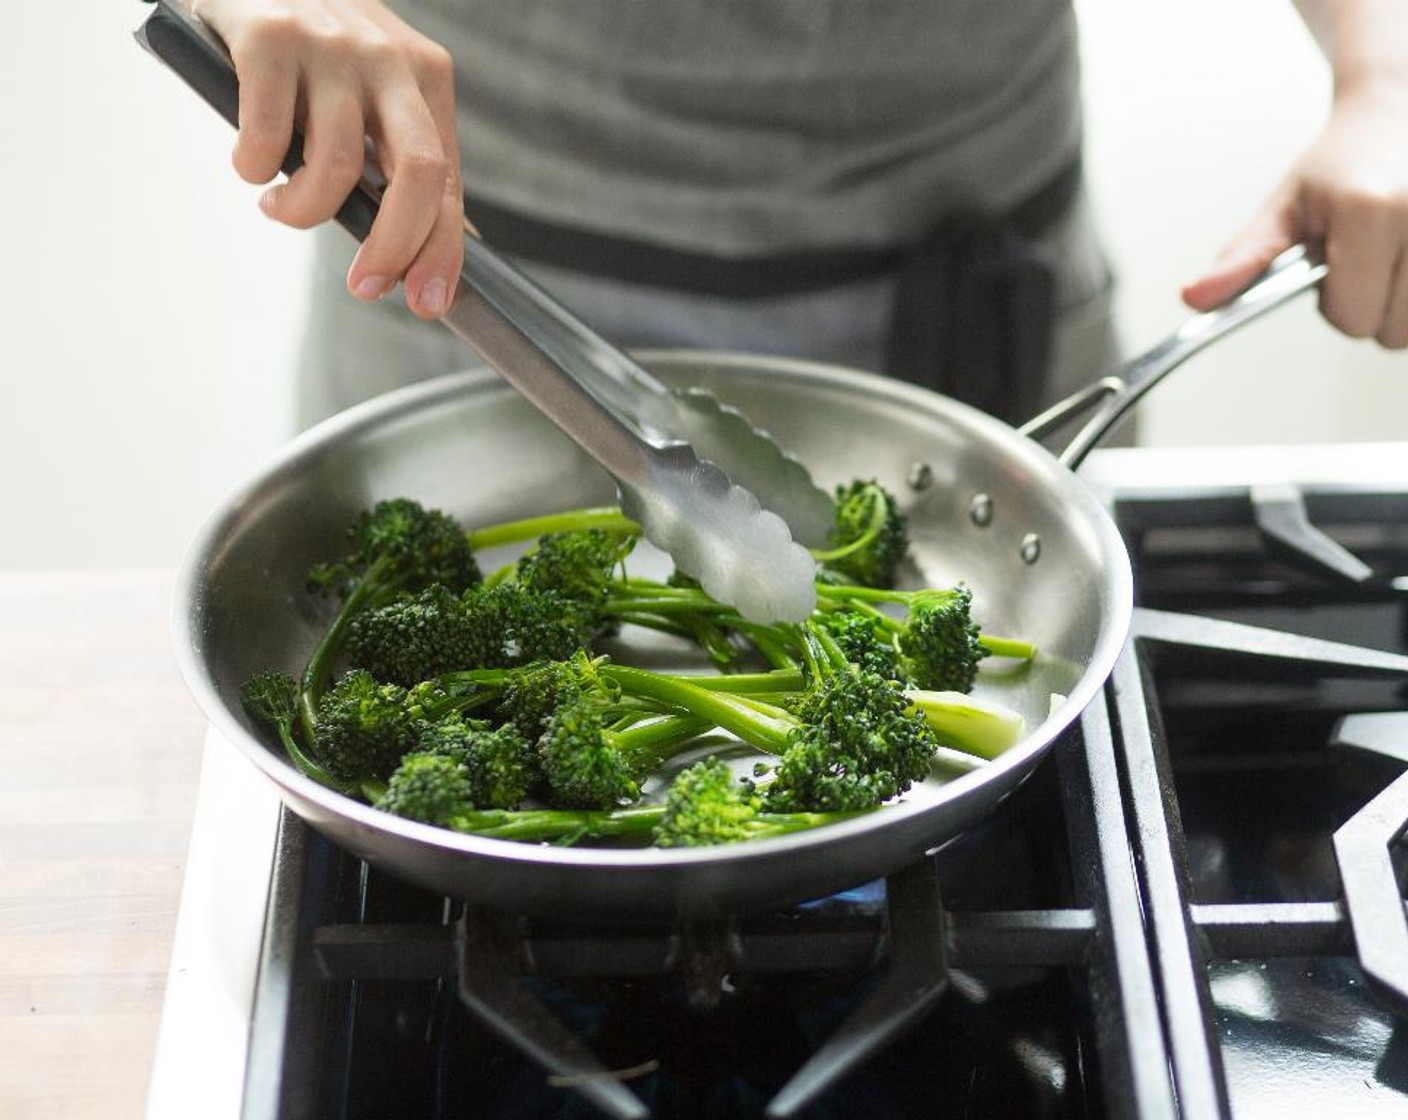 step 10 Place the broccolini, Salt (1/4 tsp) and Ground Black Pepper (1/4 tsp) and cook for 4 to 5 minutes. Remove from heat and keep warm for plating.